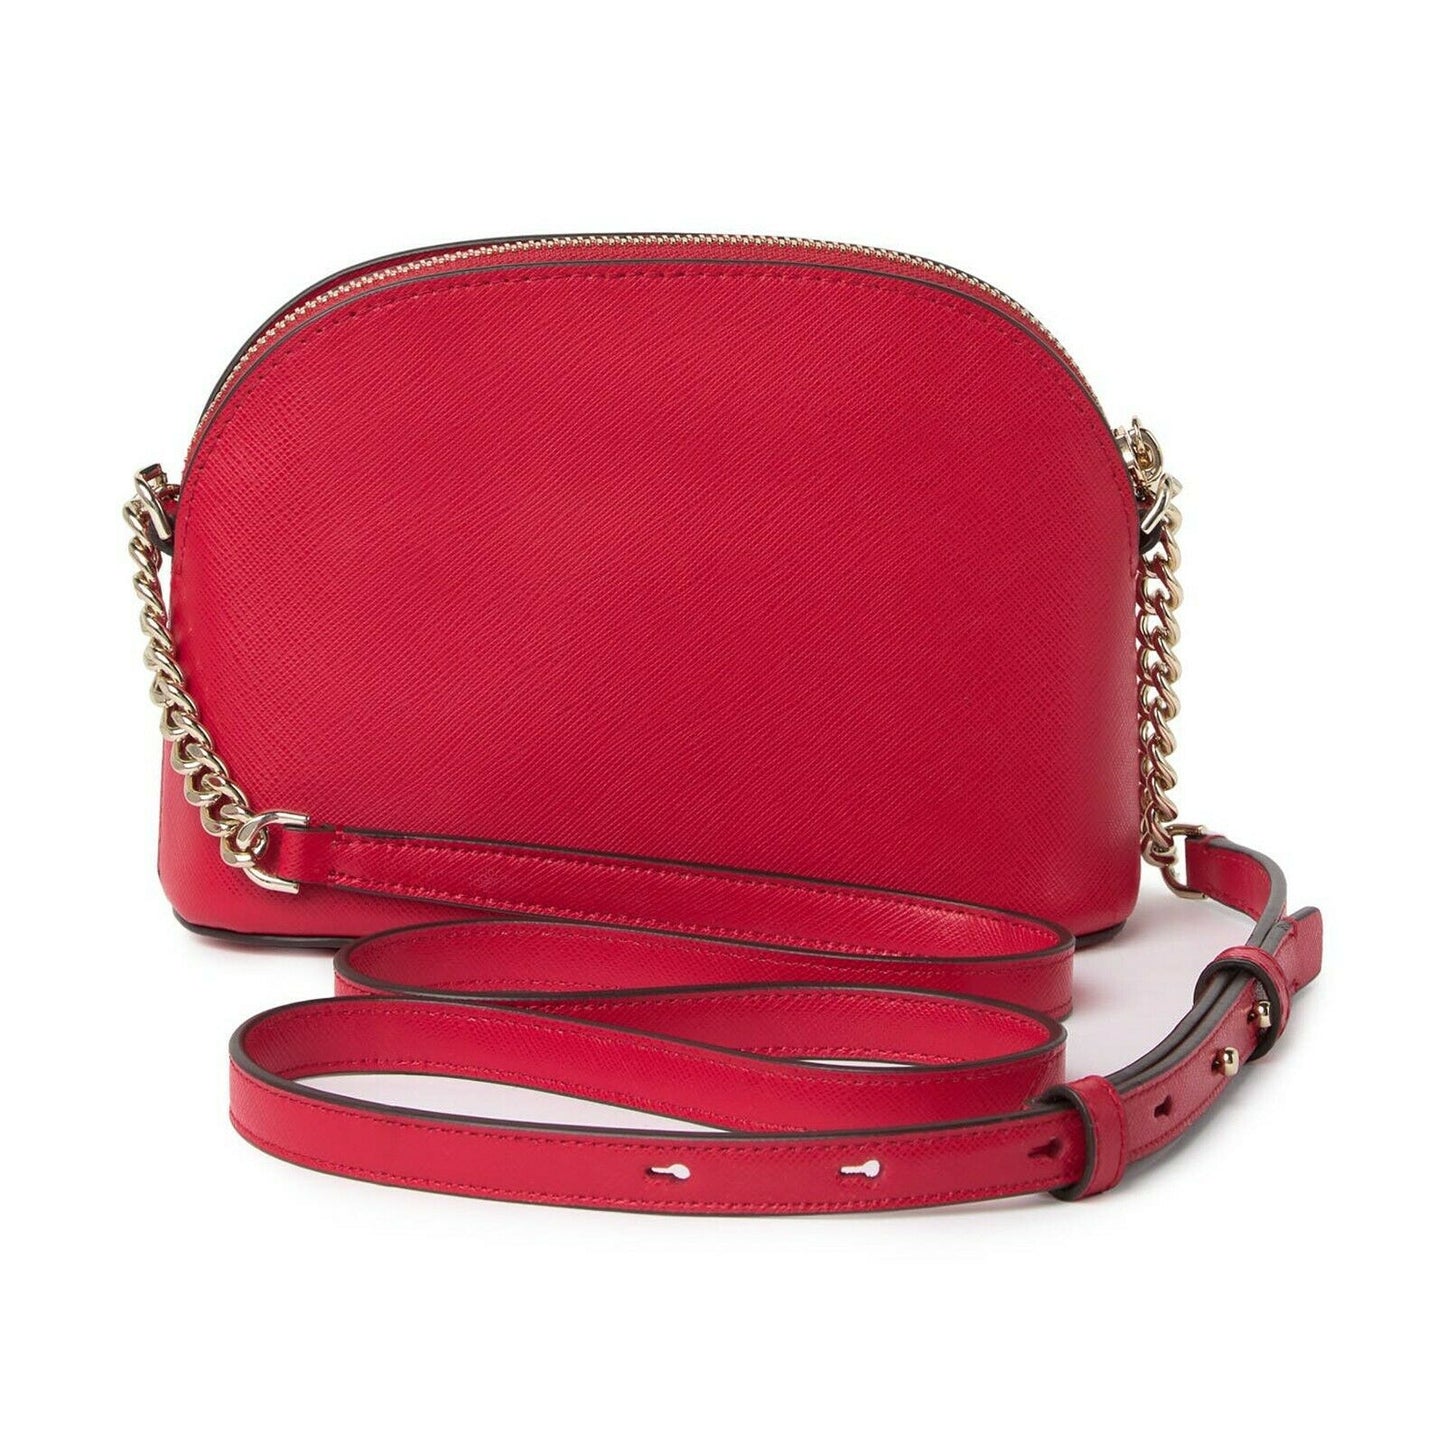 Kate Spade Spencer Hot Chili Leather Small Dome Crossbody Bag NWOT